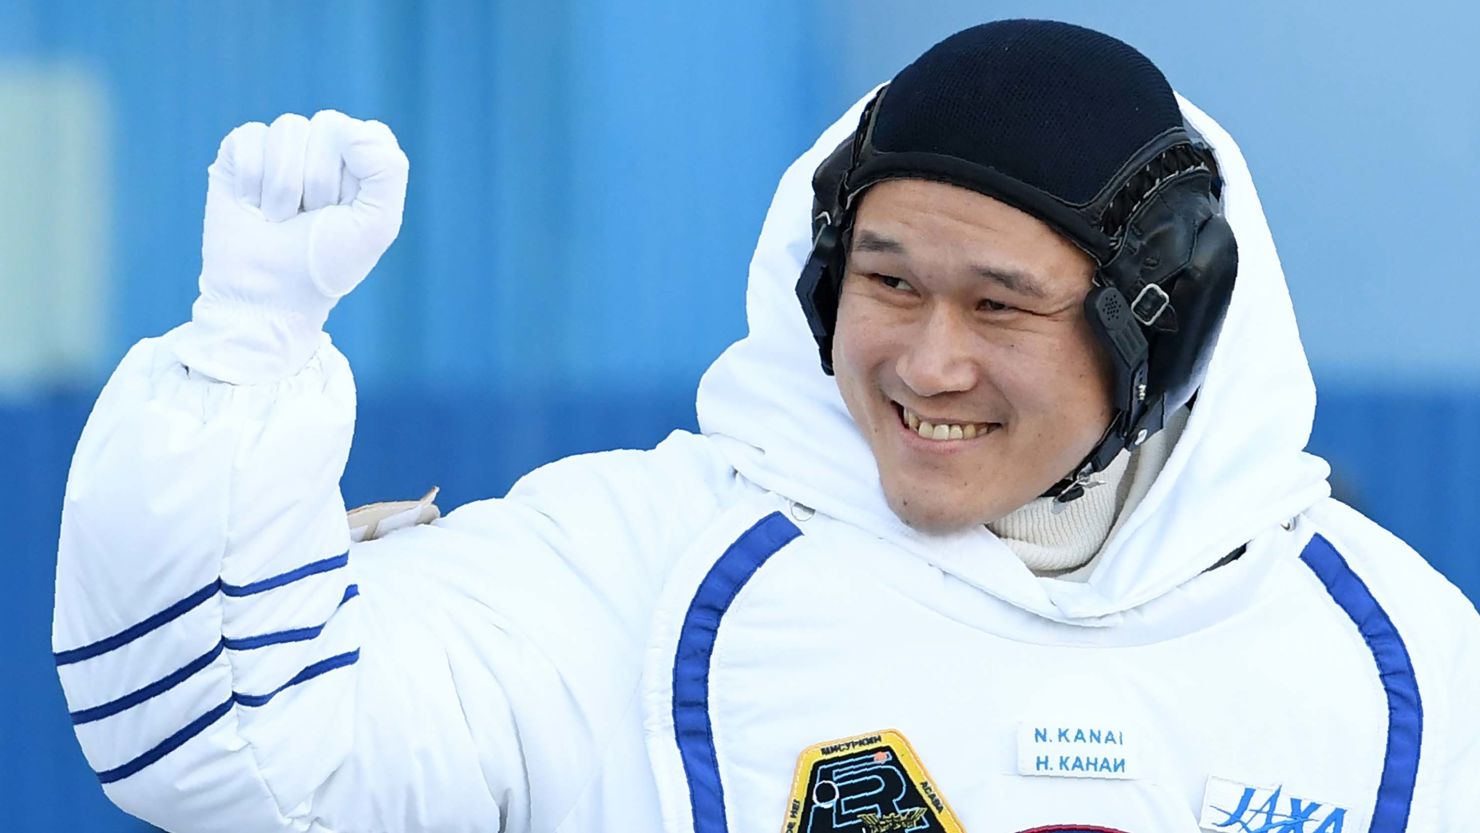 Japanese astronaut Norishige Kanai waves during a send-off ceremony ahead of his deployment to the International Space Station in December.